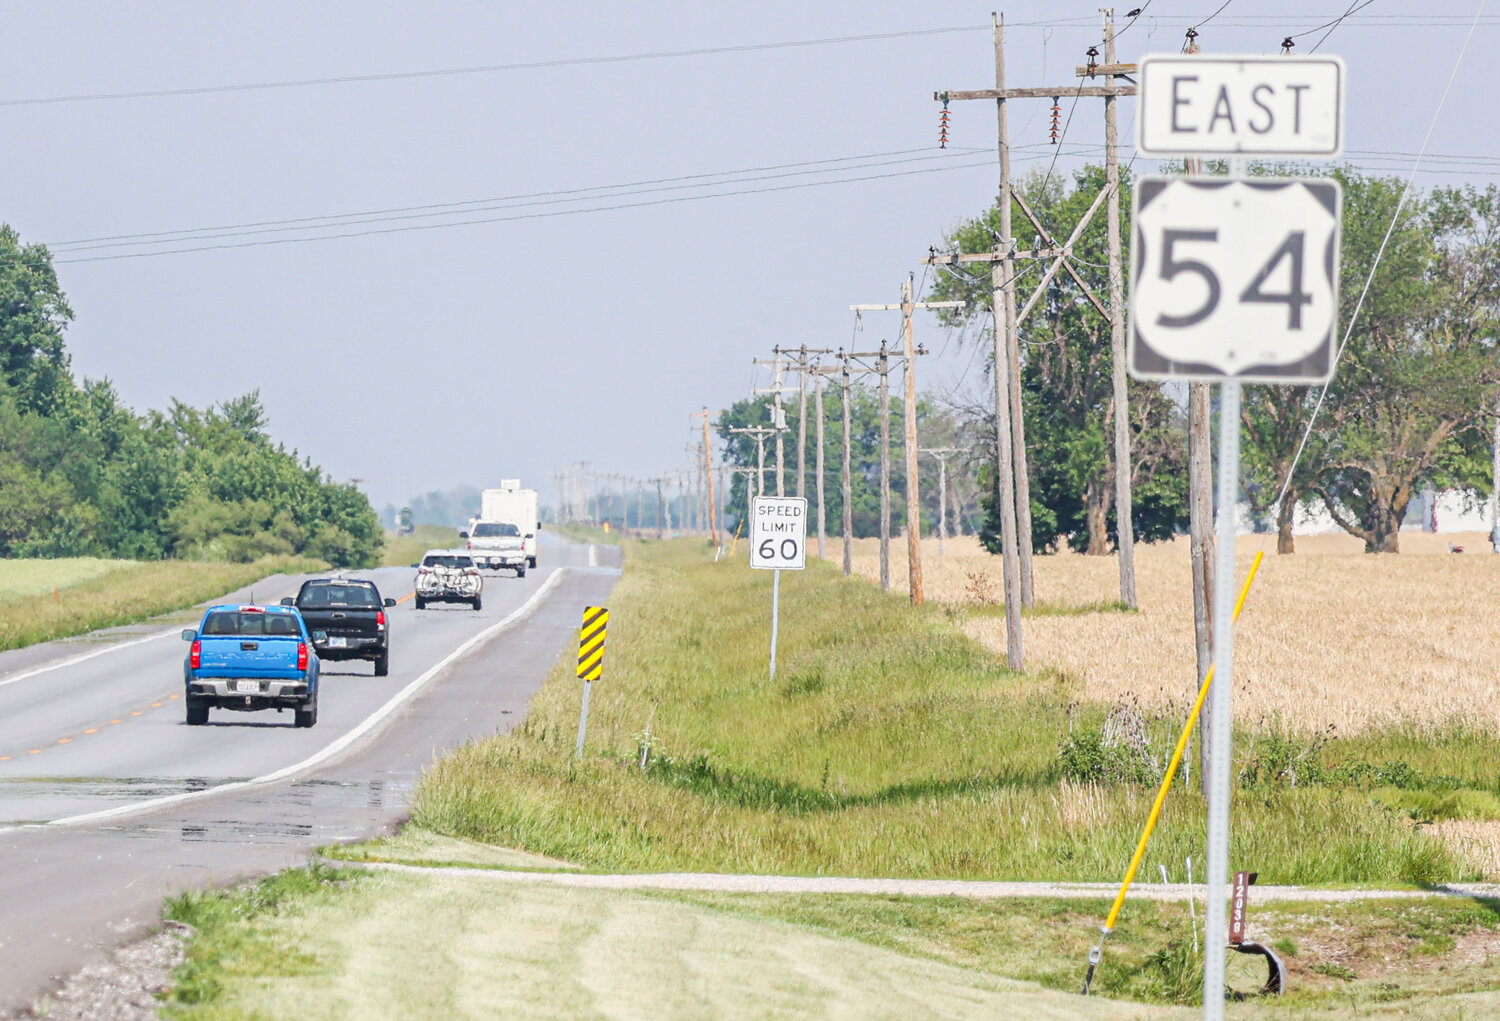 A group of vehicles on eastbound U.S. 54 Highway outside of Mexico bottled up on Sunday and is a common occurrence along the route as faster moving traffic catches up to slower moving vehicles.